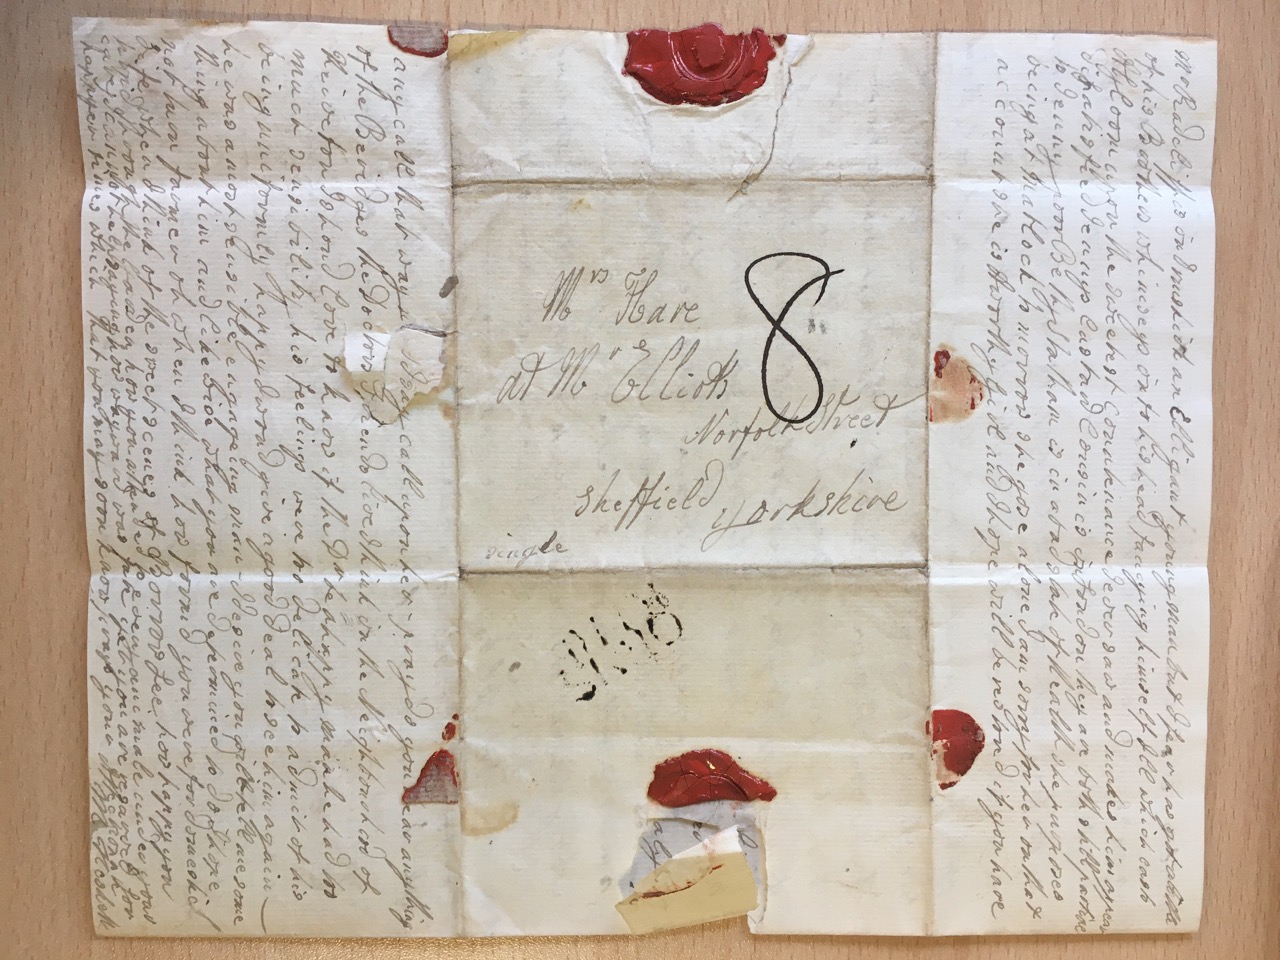 Image #4 of letter: Mary Ann Hesketh to Ann Hare, 22 June